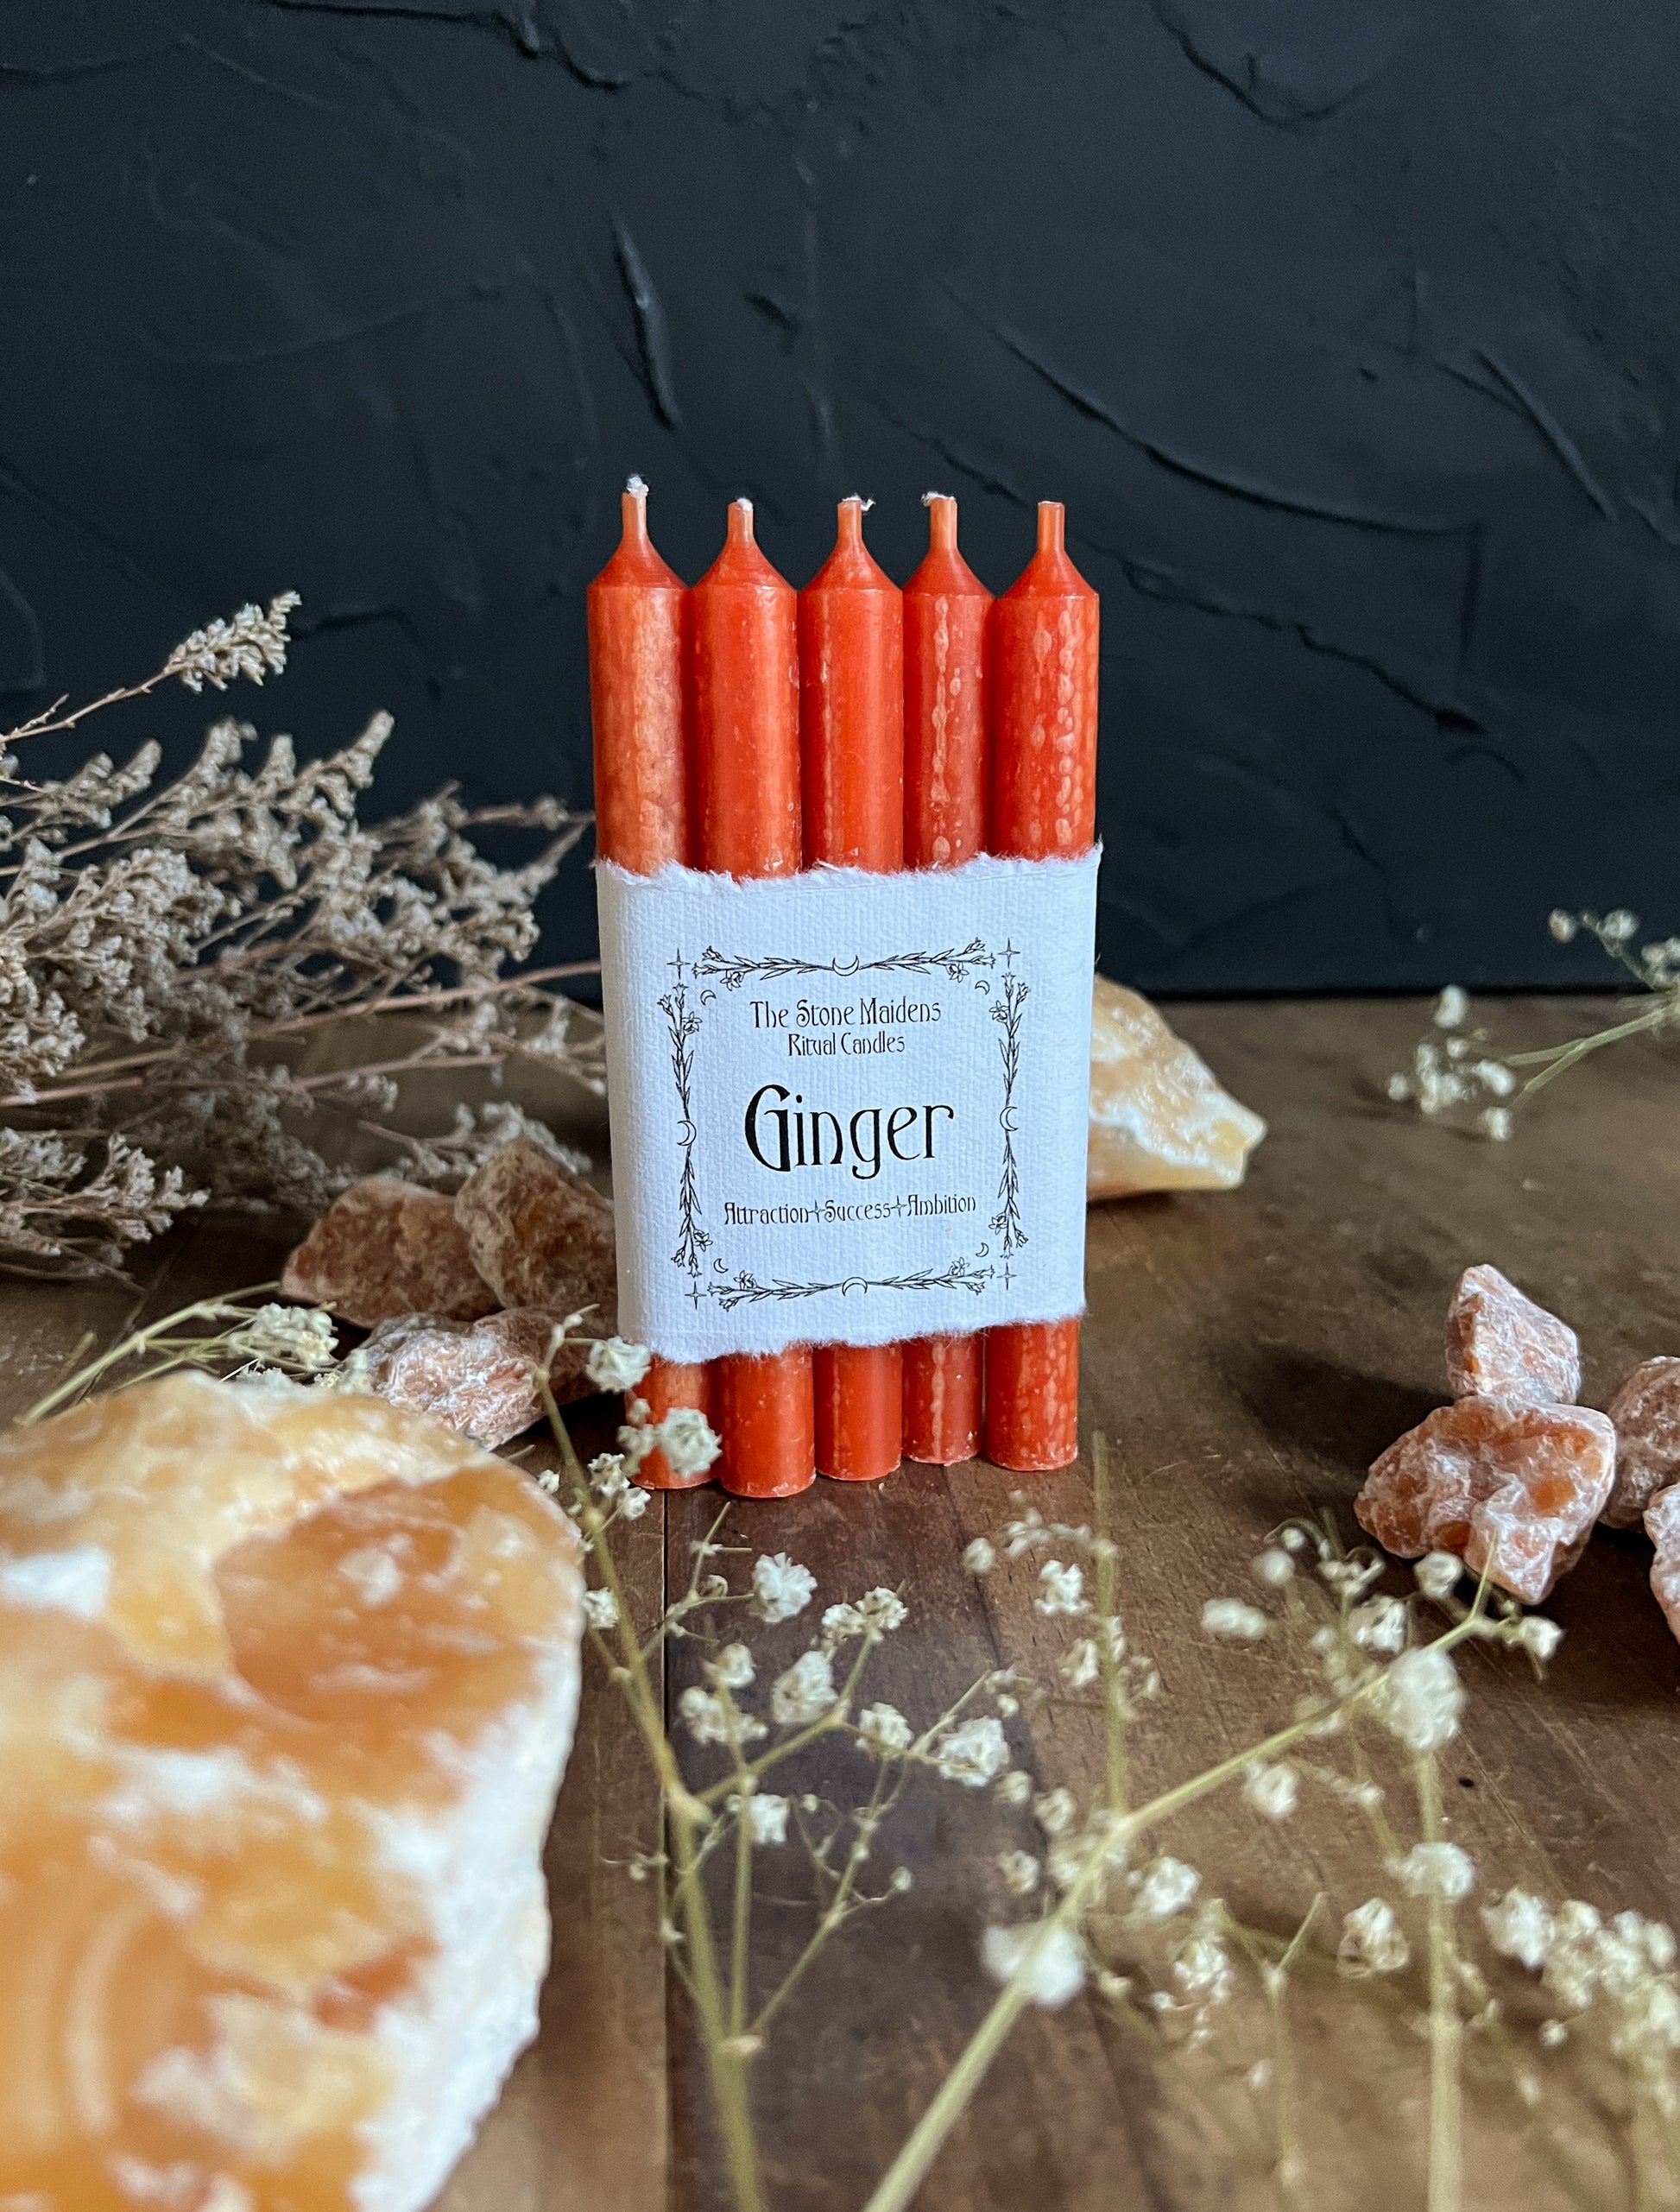 Orange Ginger ritual candles arranged on a dark wooden altar surrounded by crystals, sold at The Stone Maidens